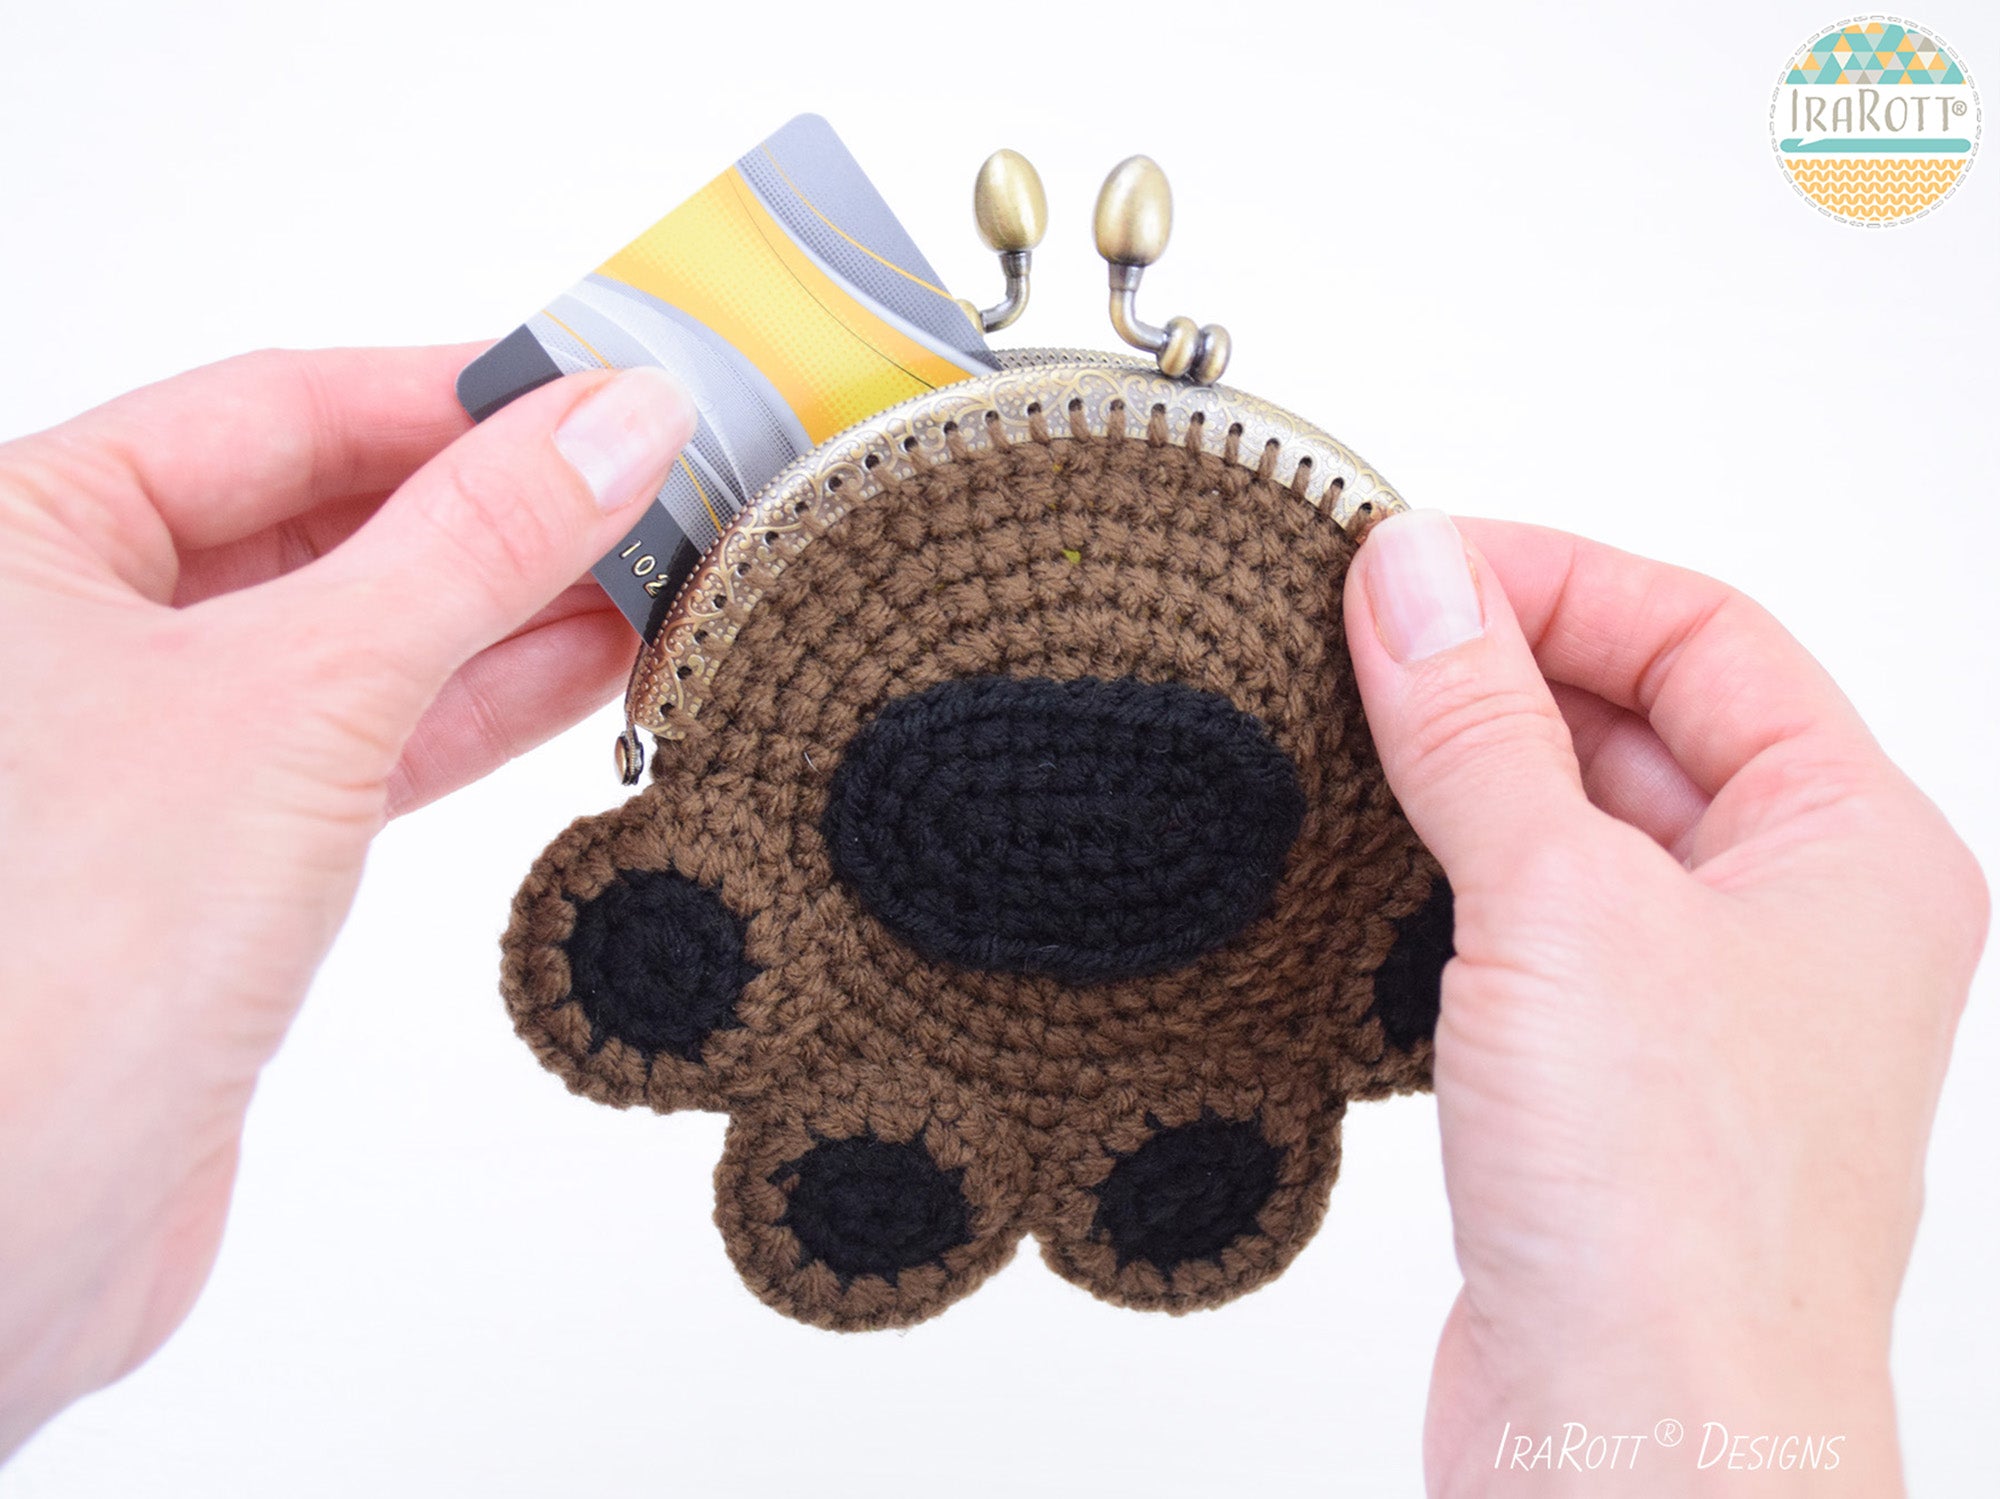 Wicker Weave Crocheted Coin Purse Pattern: Easy to make, fun to give away  as gifts! (Fun Crochet Designs Crocheted Purse Collection Book 12) eBook :  Mills, Lisa: Amazon.in: Kindle Store